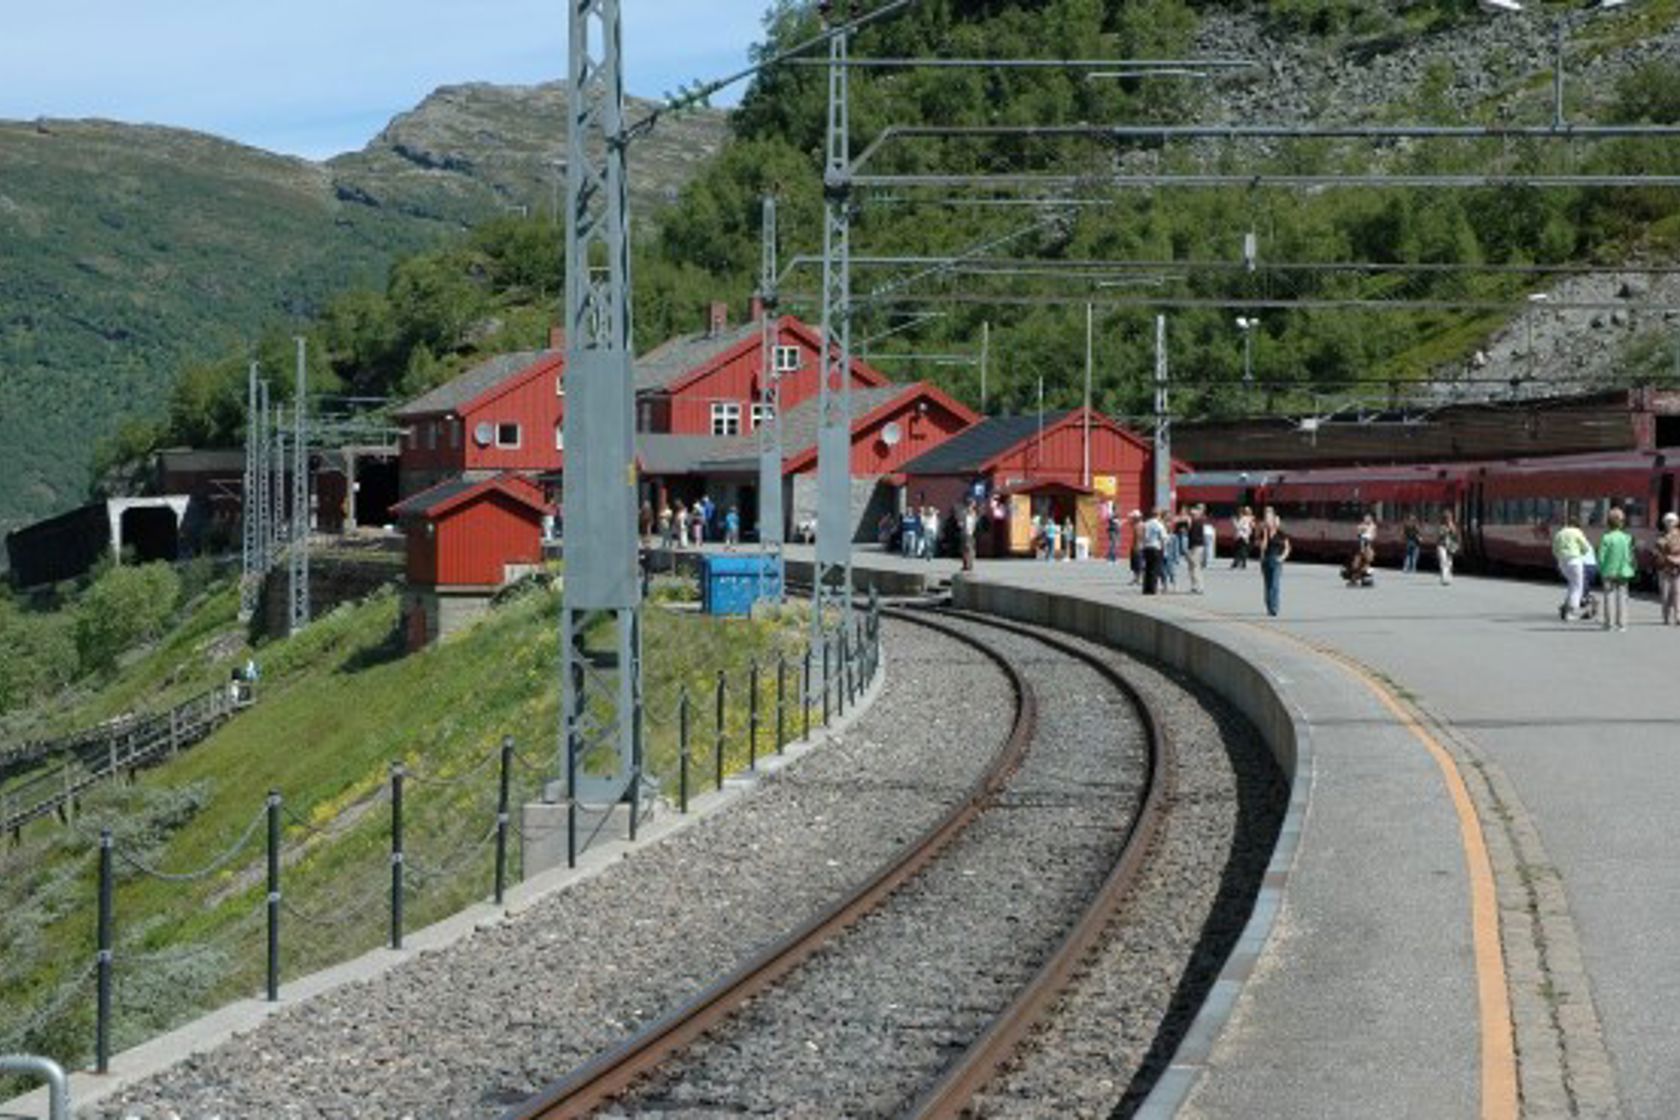 Exterior view of Myrdal station